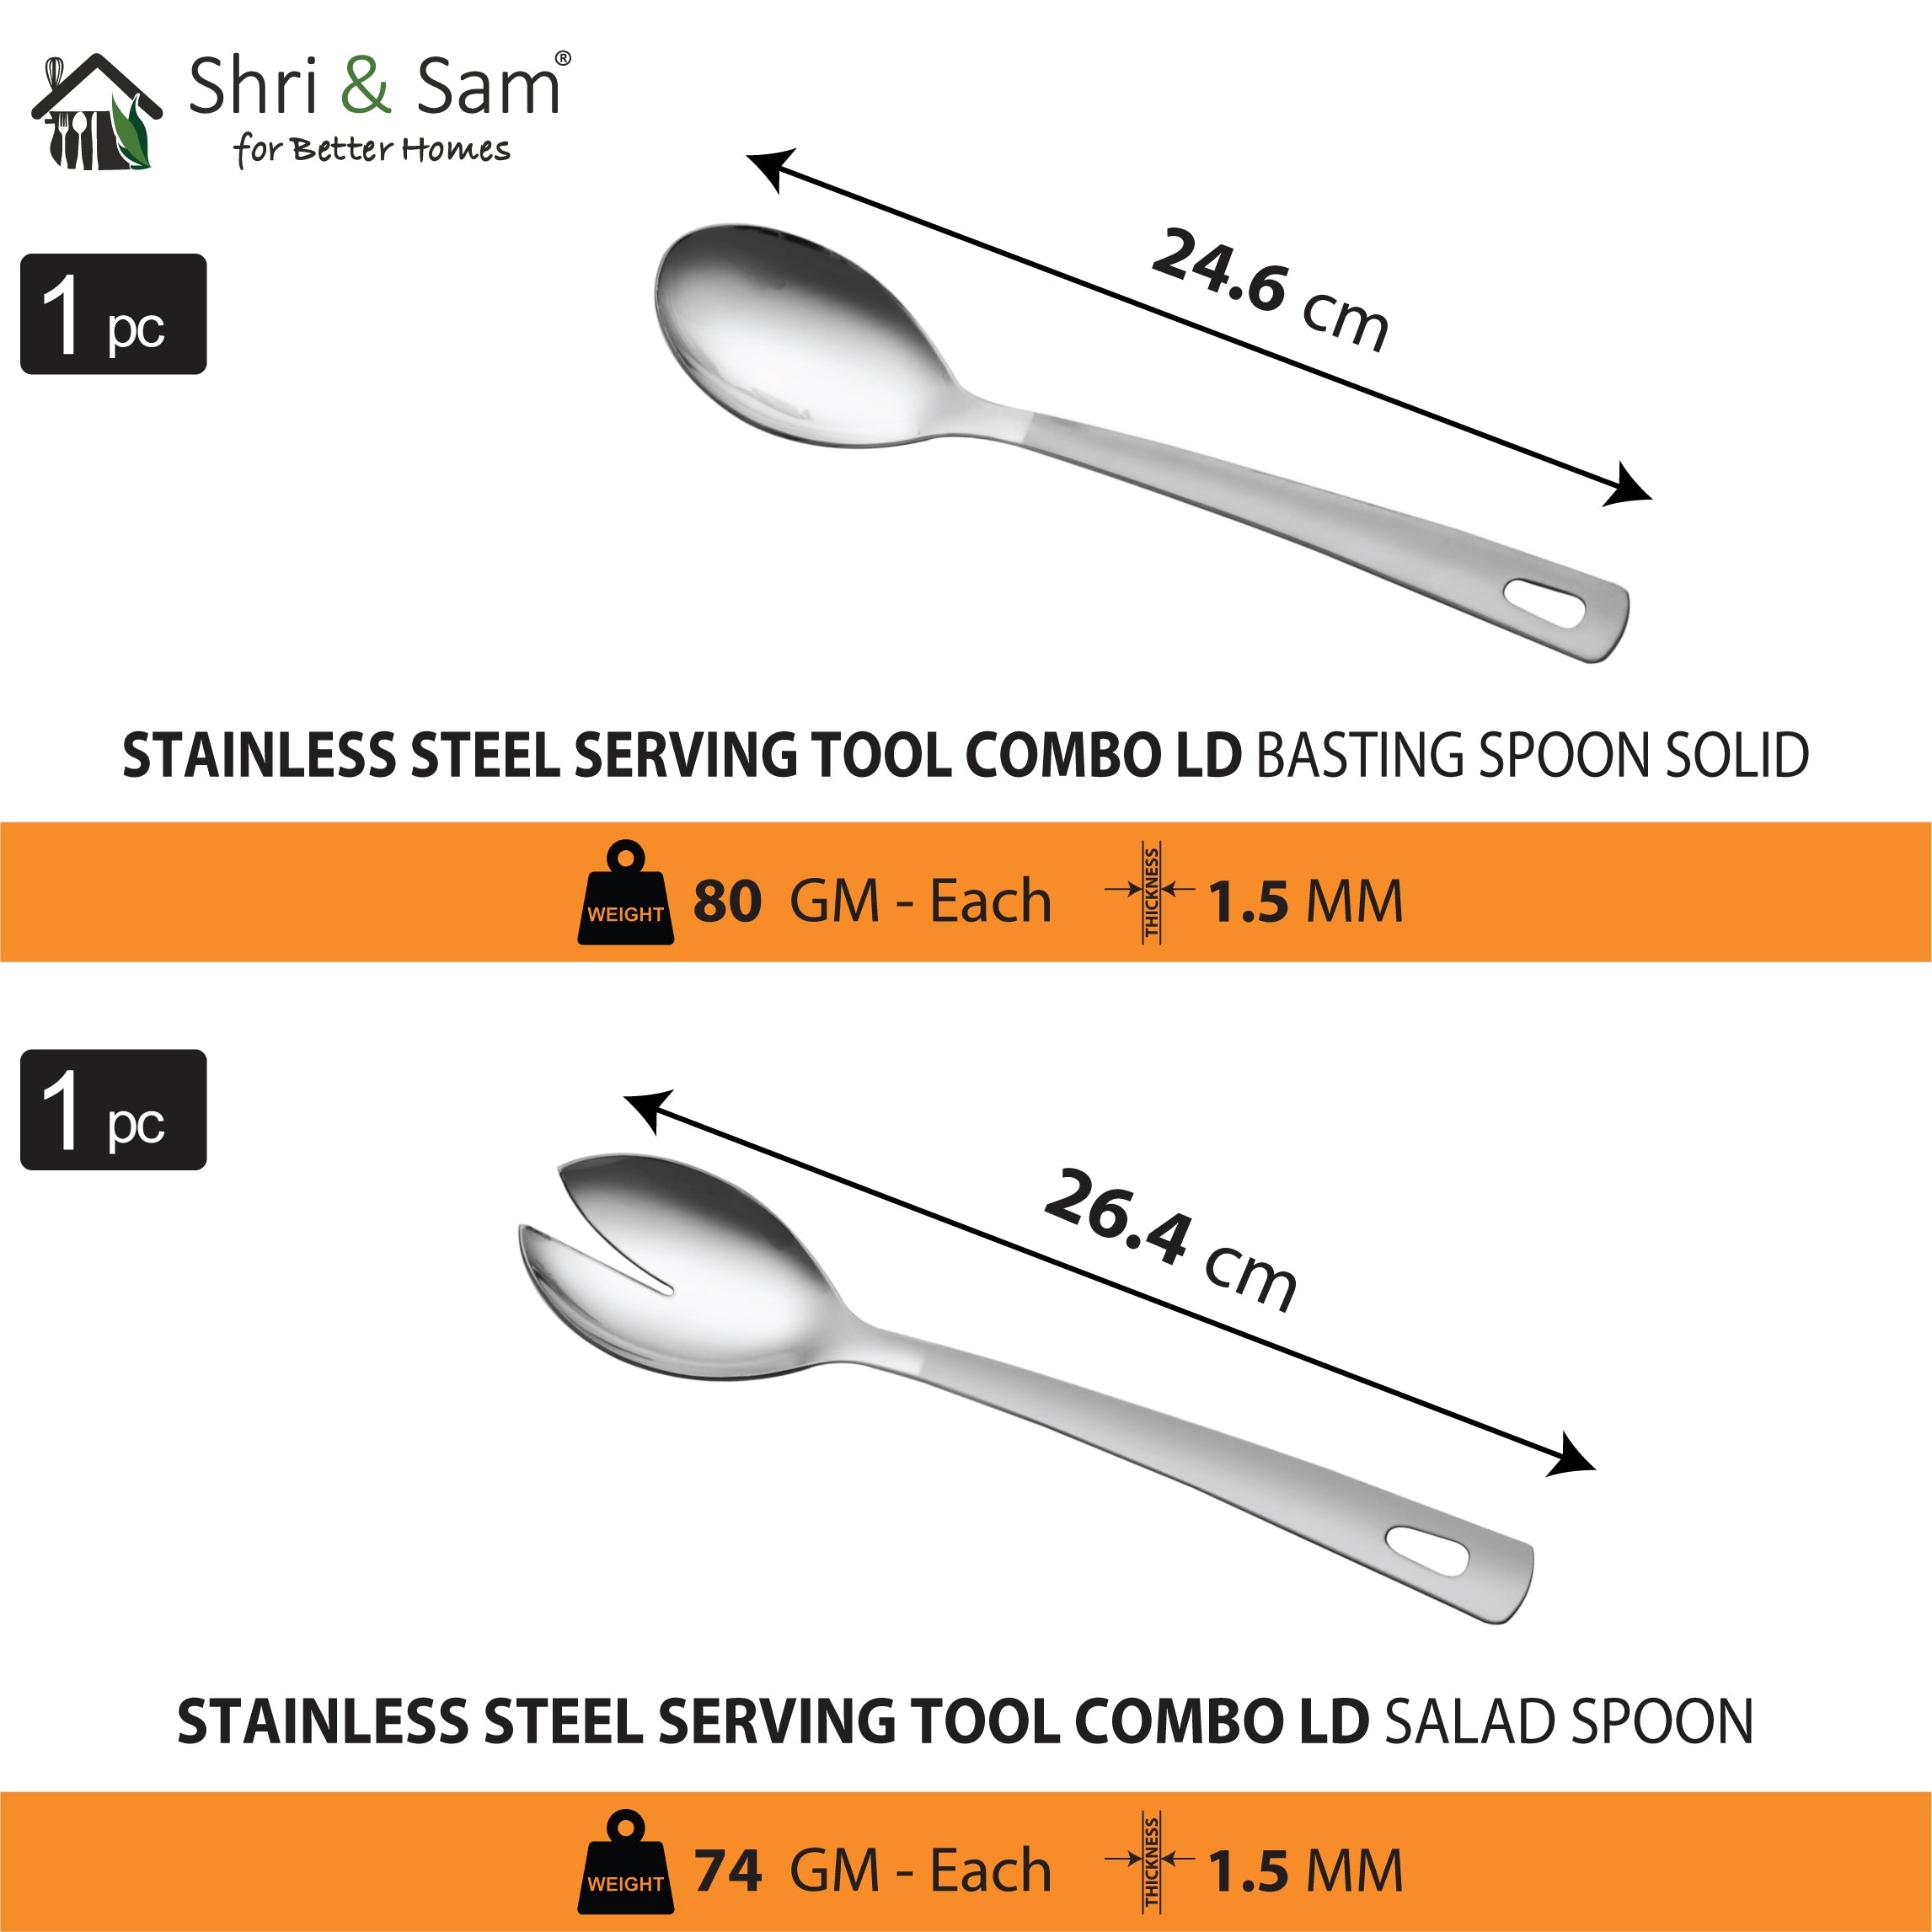 Stainless Steel Serving Tool Combo LD